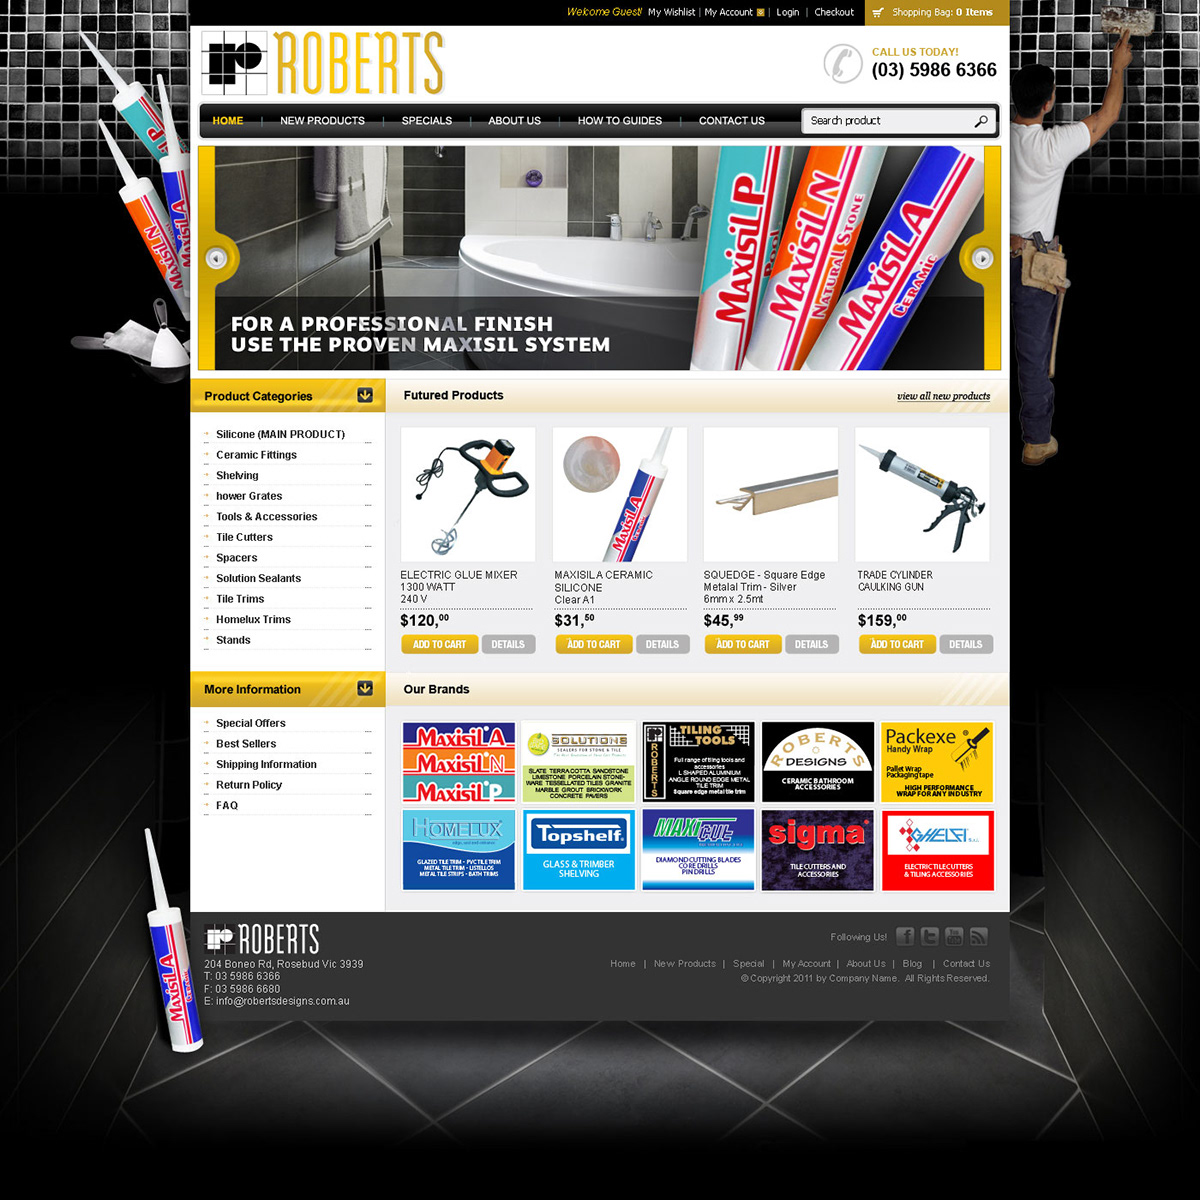 Web  design  Graphic  site  page Construction materials bathroom Fittings sanitary